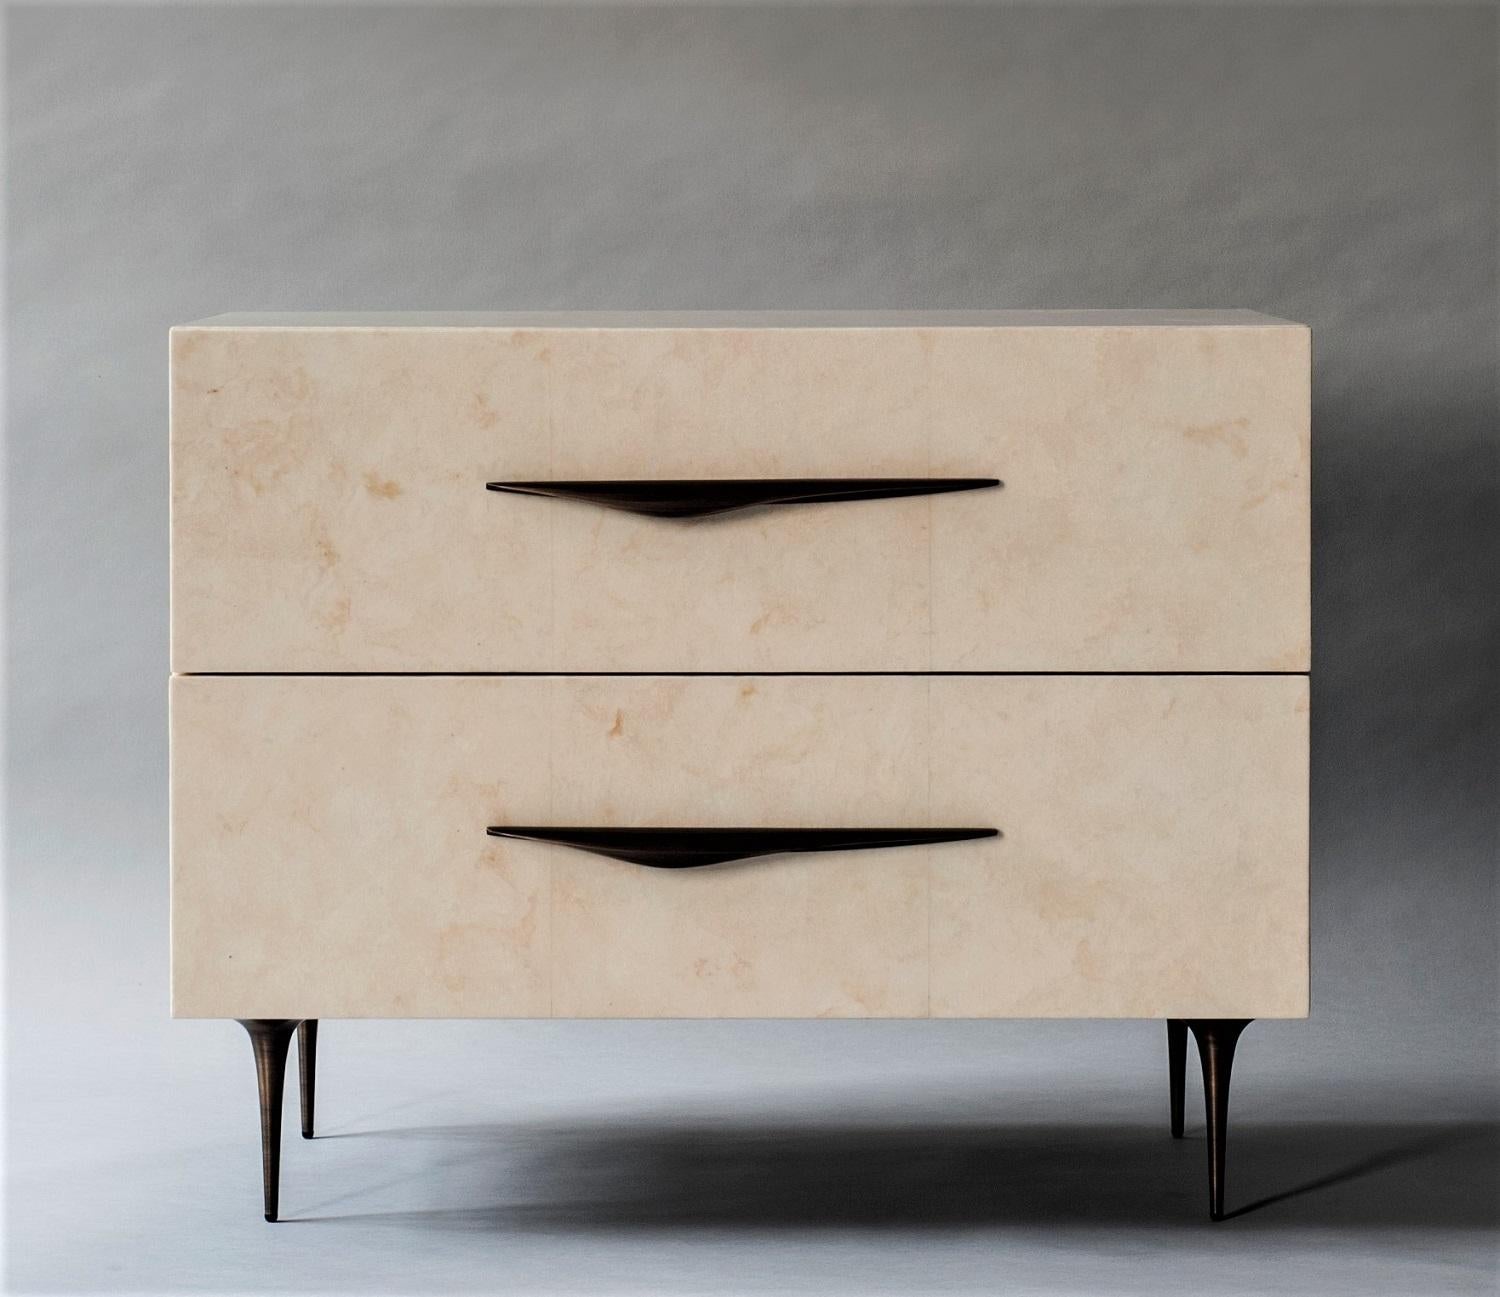 The sculptural legs and handles of the Antwerp bedside table contrast the soft color shifts in the Carta sheathing the table's body.